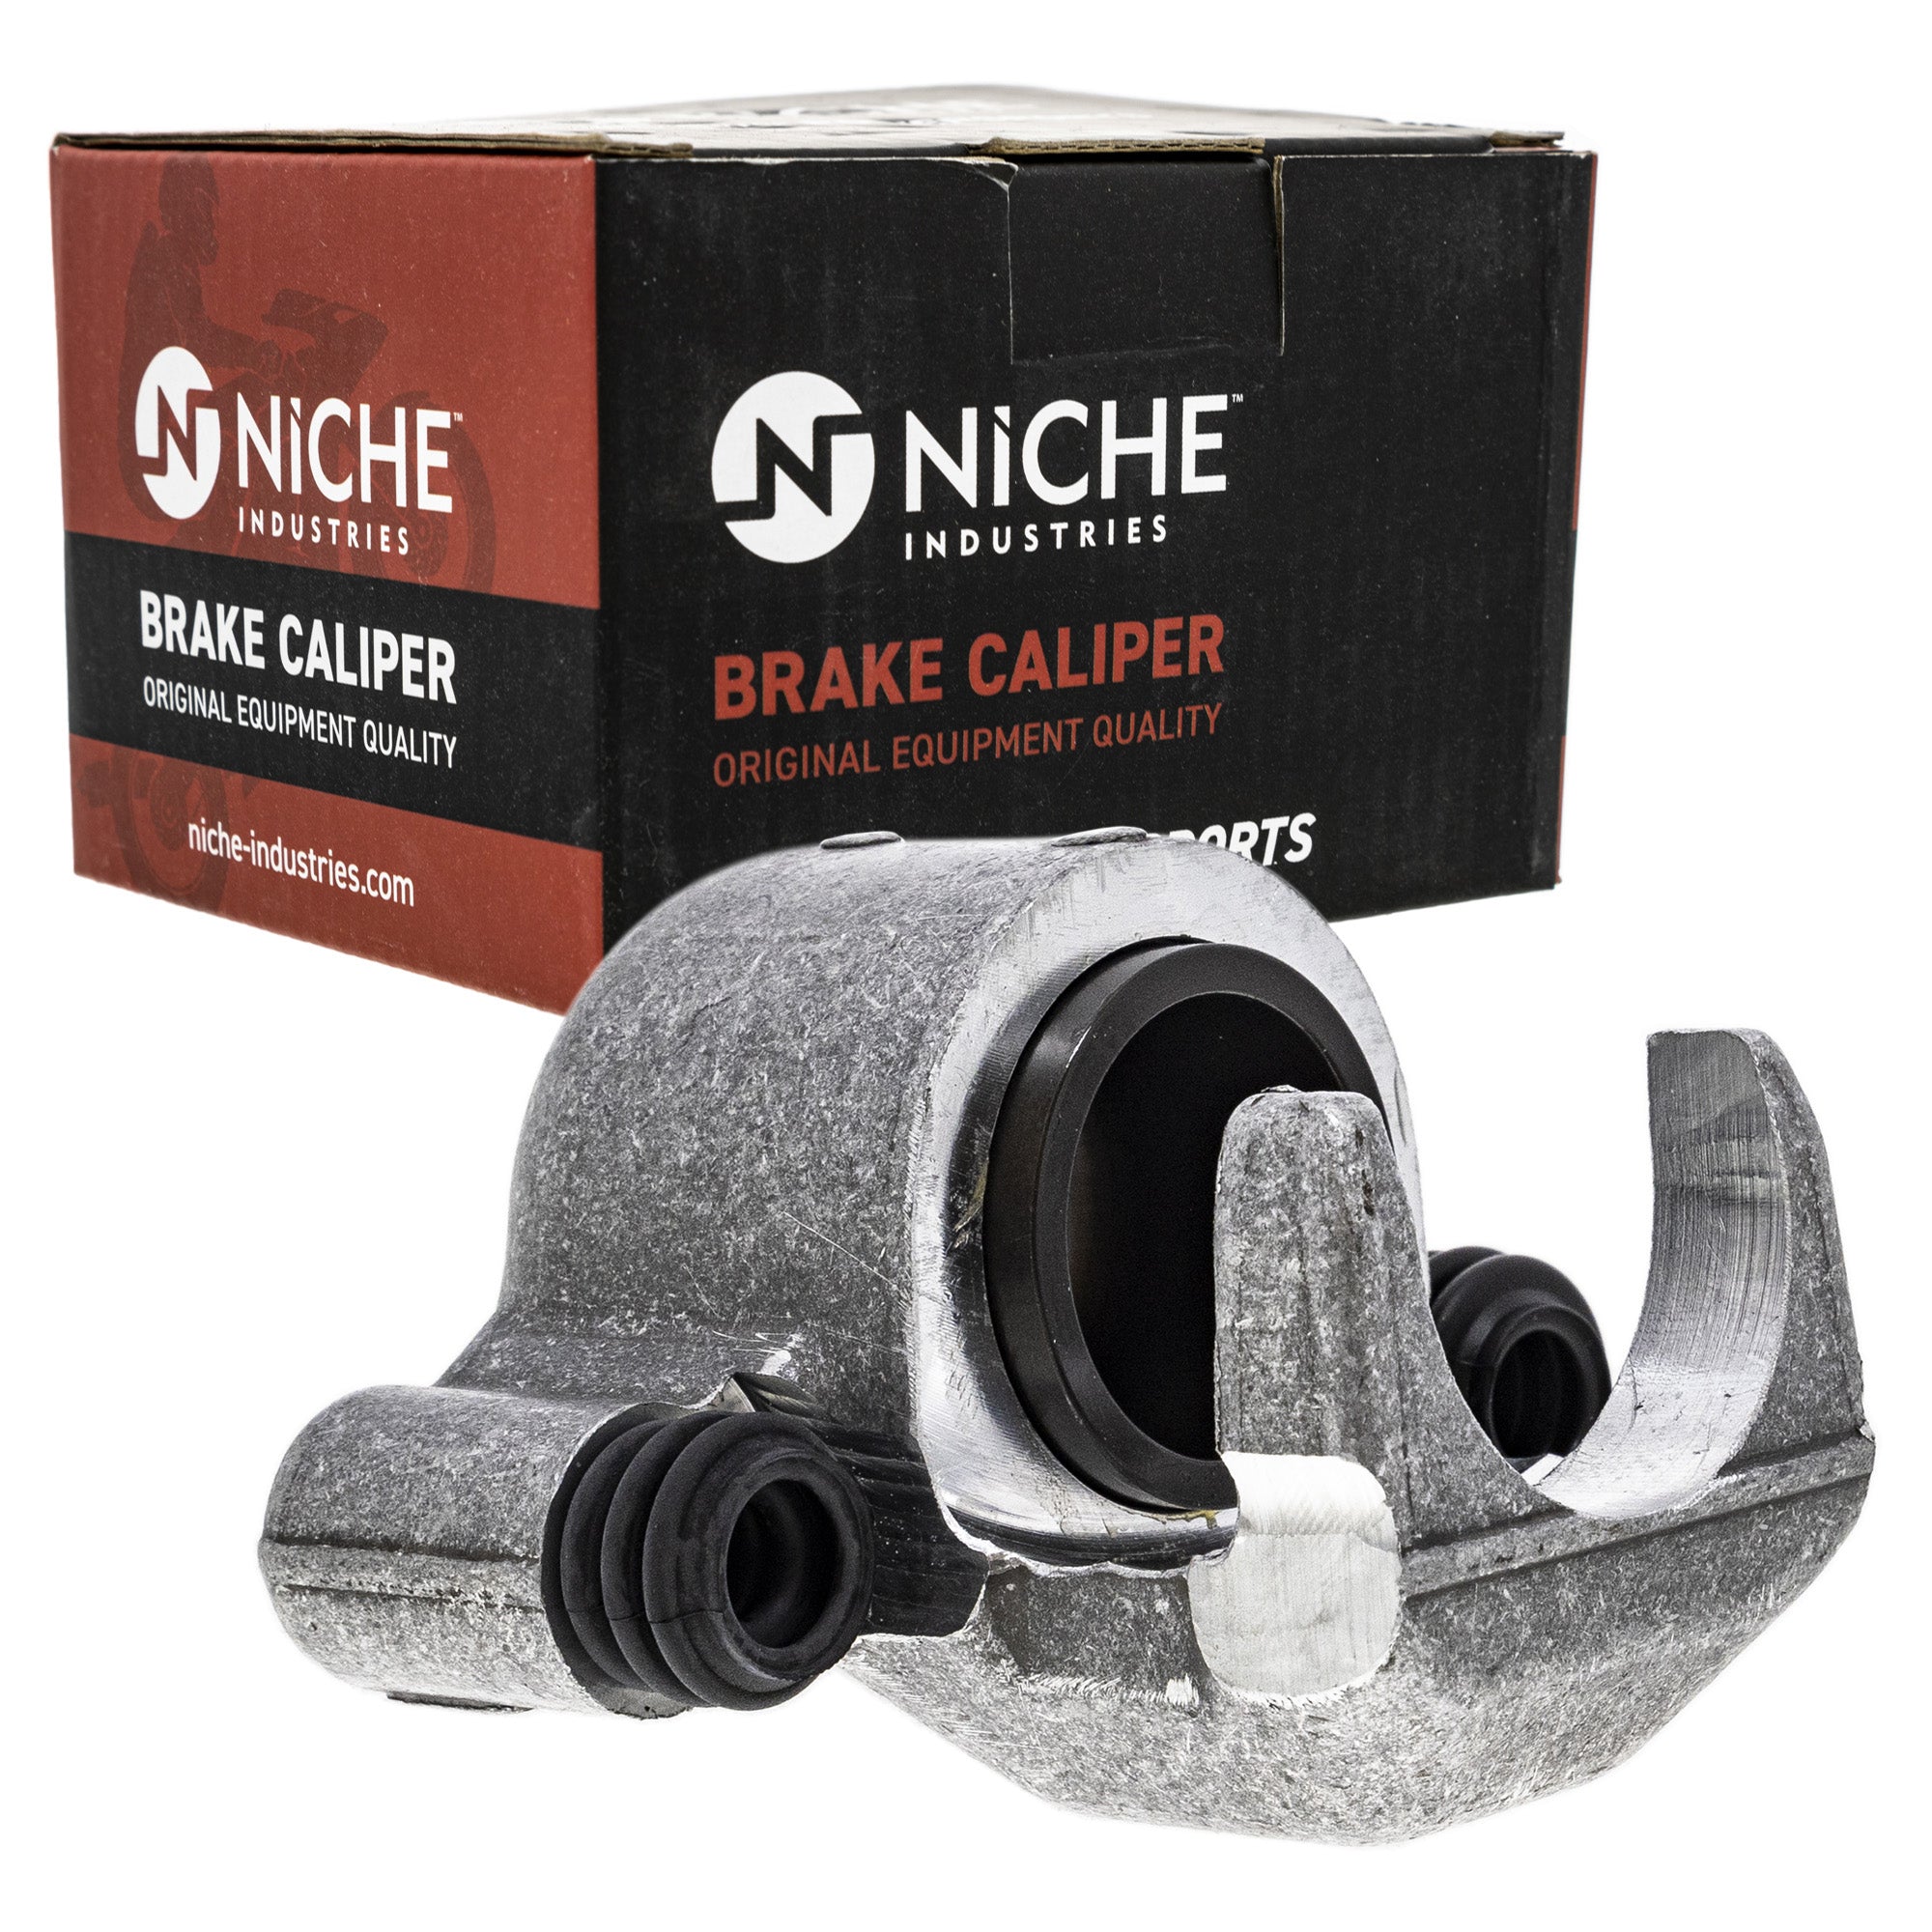 NICHE 519-CCL2220P Brake Caliper Assembly 2-Pack for zOTHER Polaris